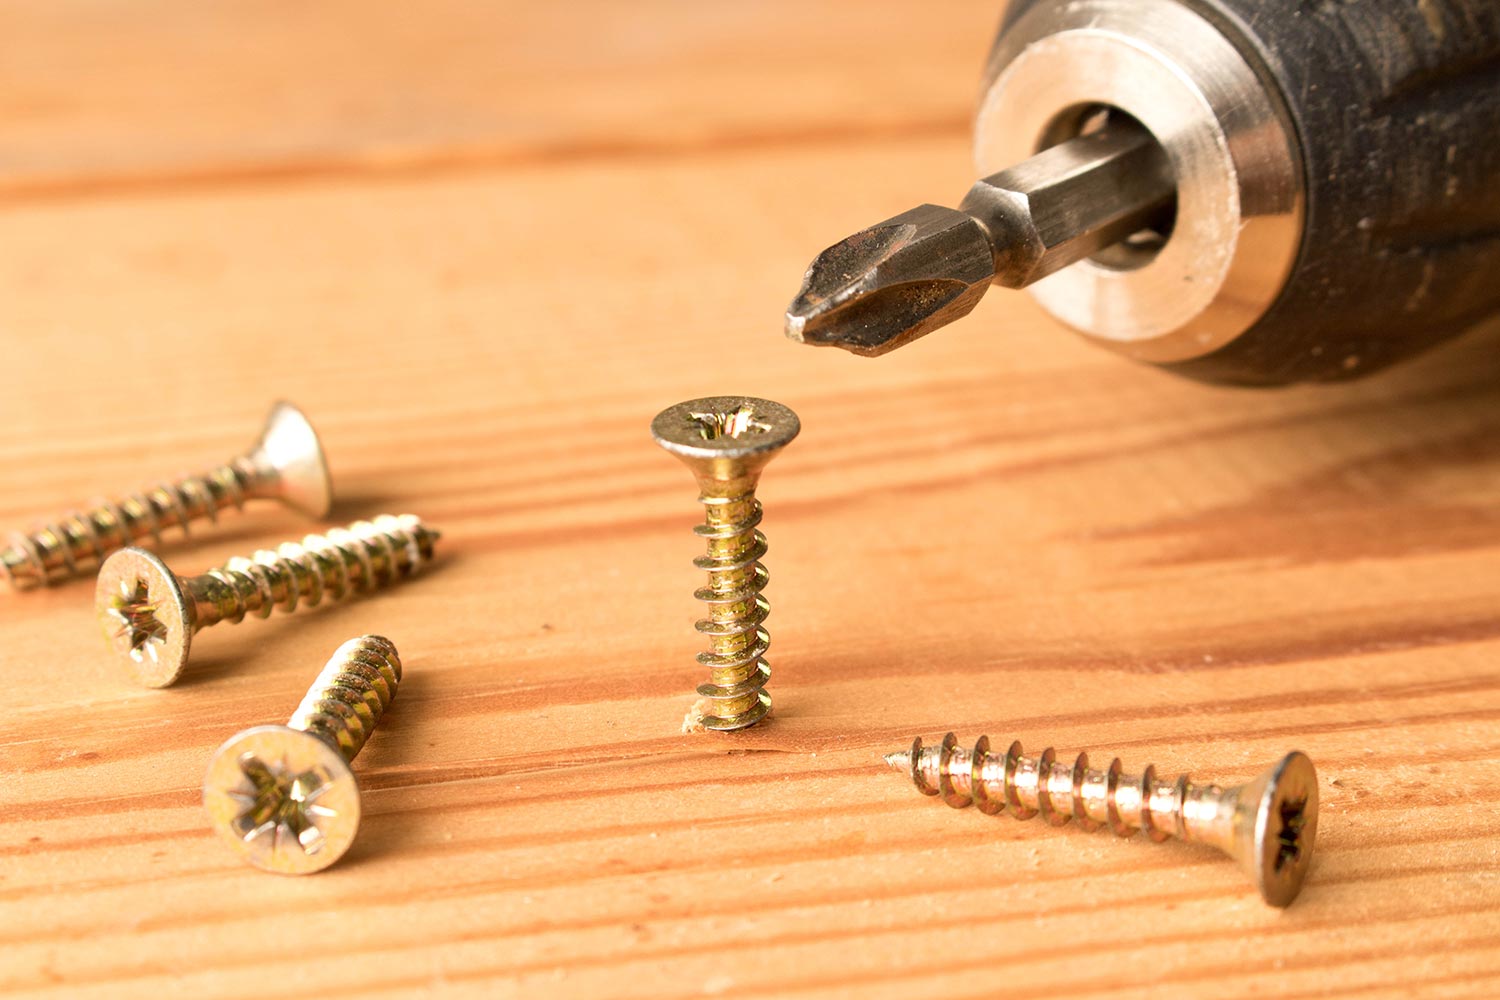 Screwdrivers and screws on a wooden table